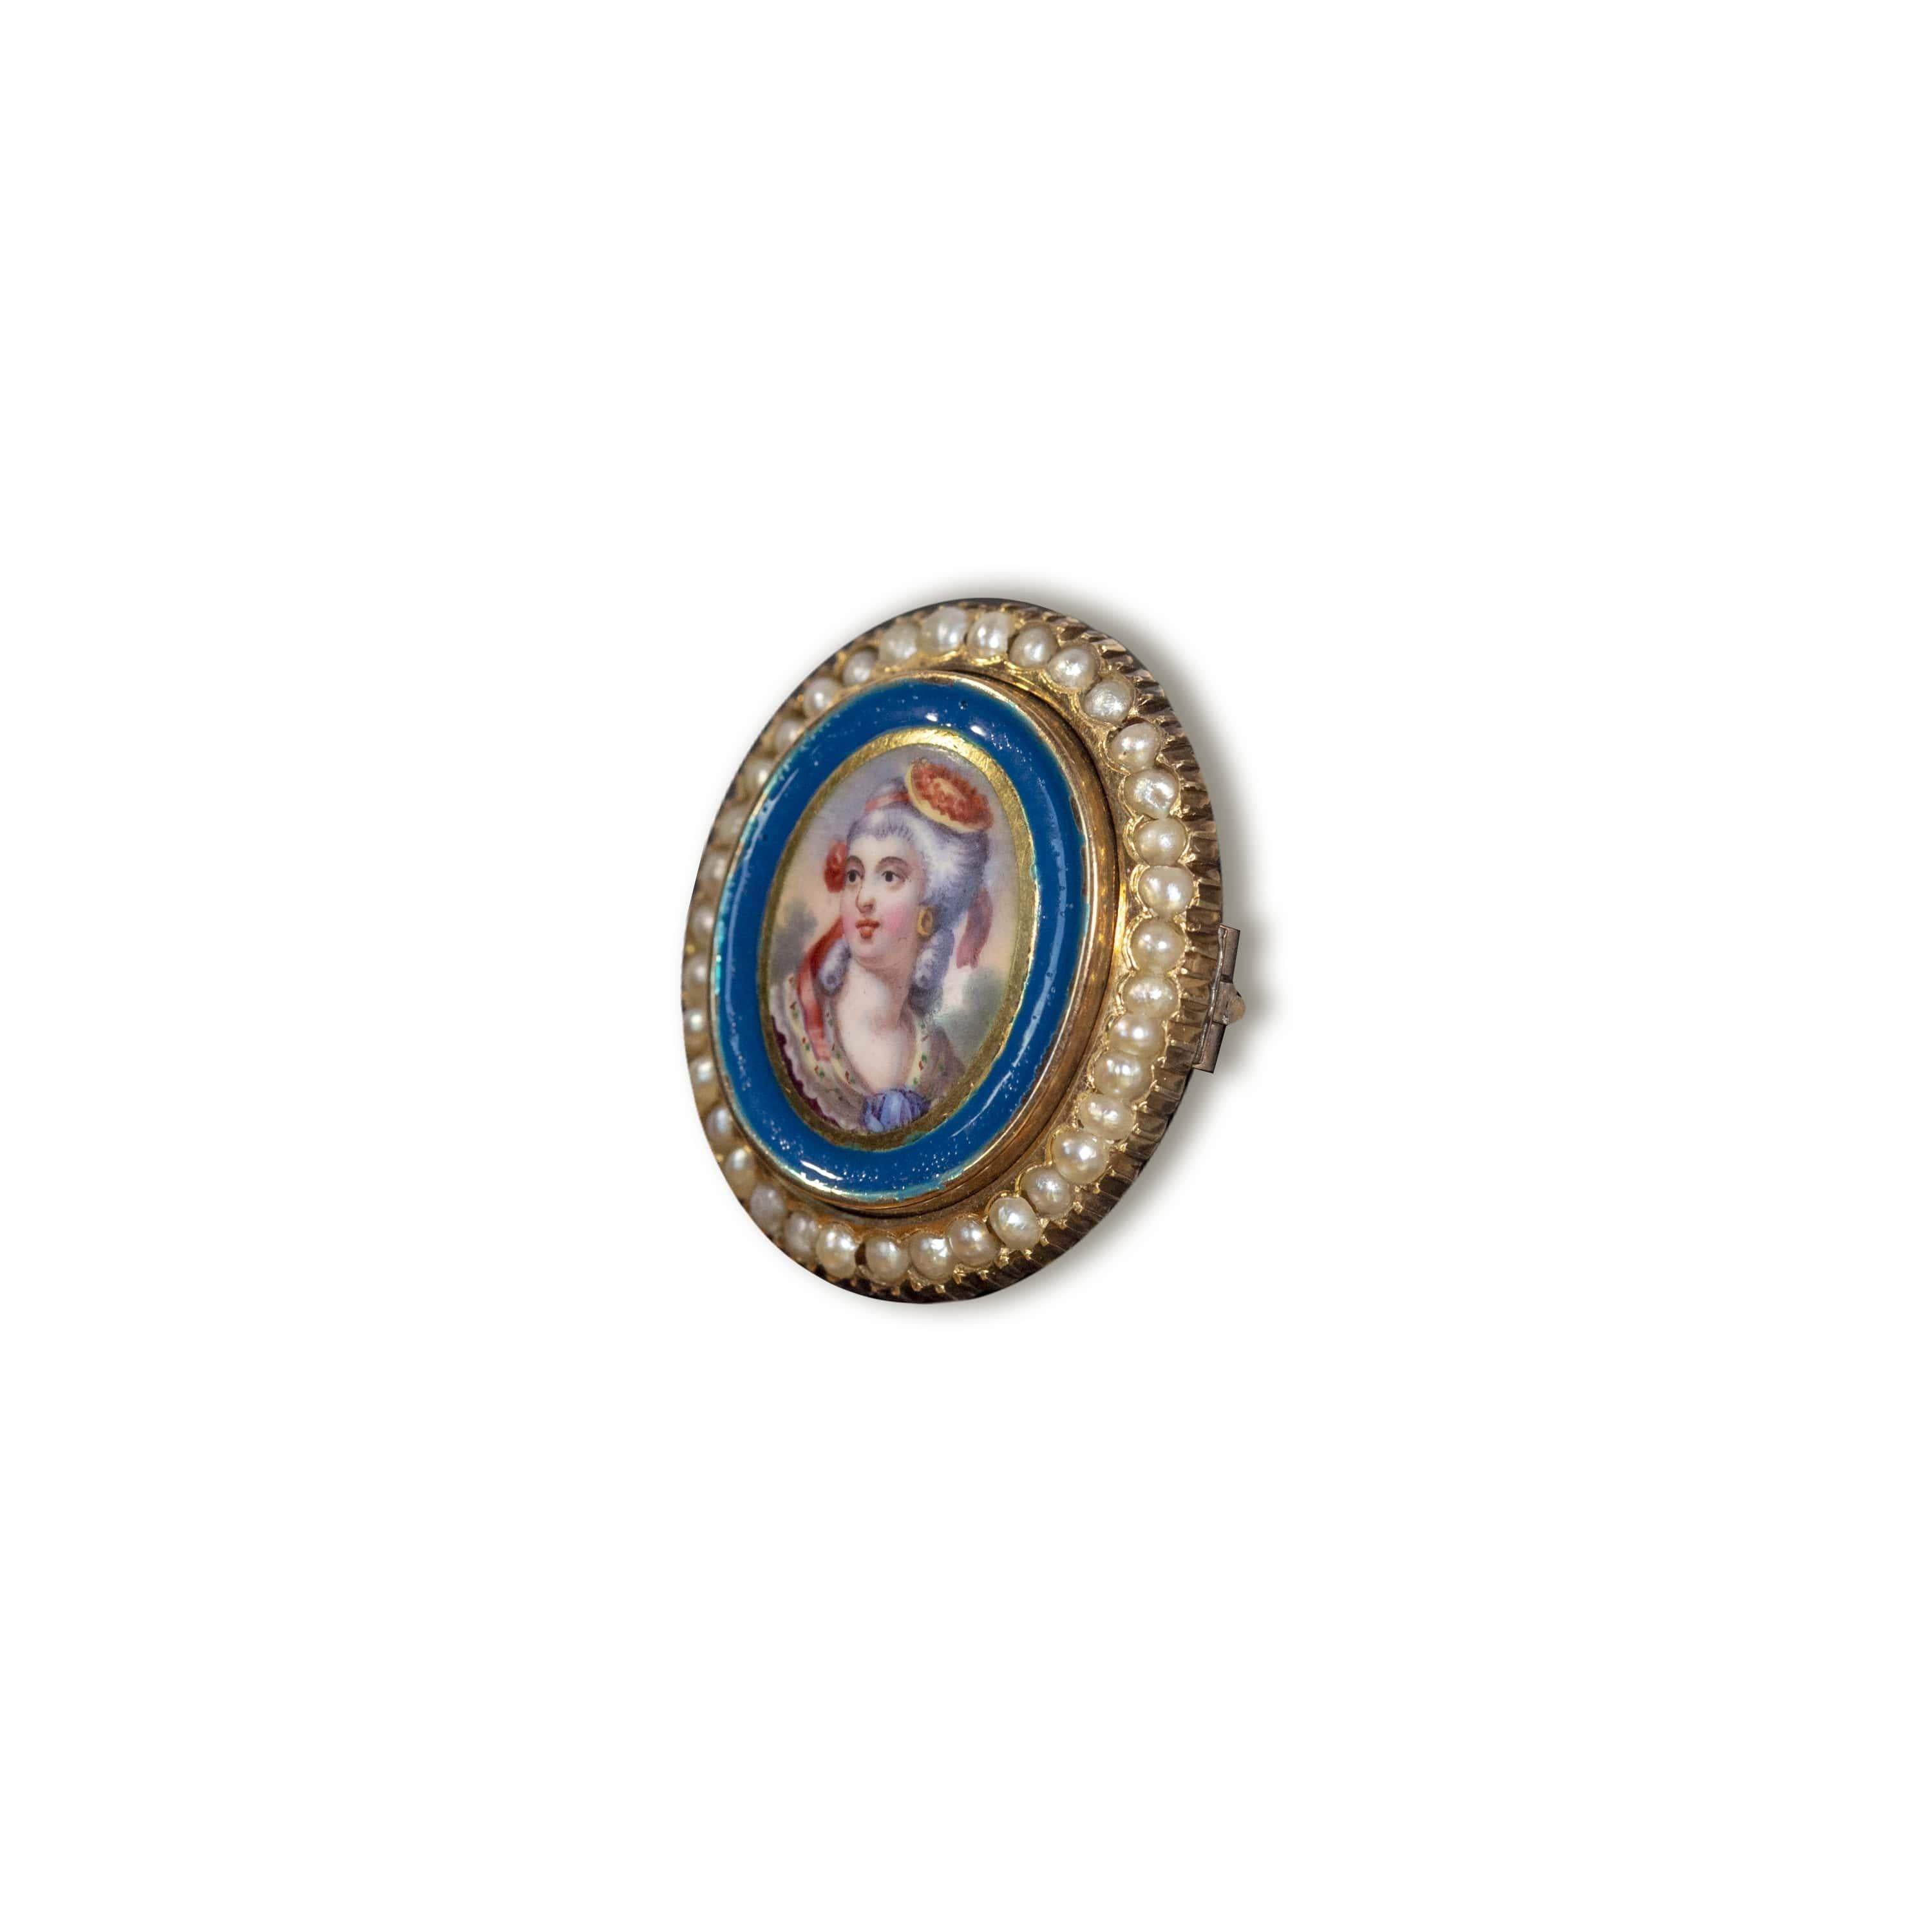 Antique 14k gold portrait brooch hand painted Swiss enamel porcelain with natural seed pearls. It's featuring the miniature portrait of a lady from the court of king XVI of France. It is framed with inset pearls. It measures approximately 3/4 by 1